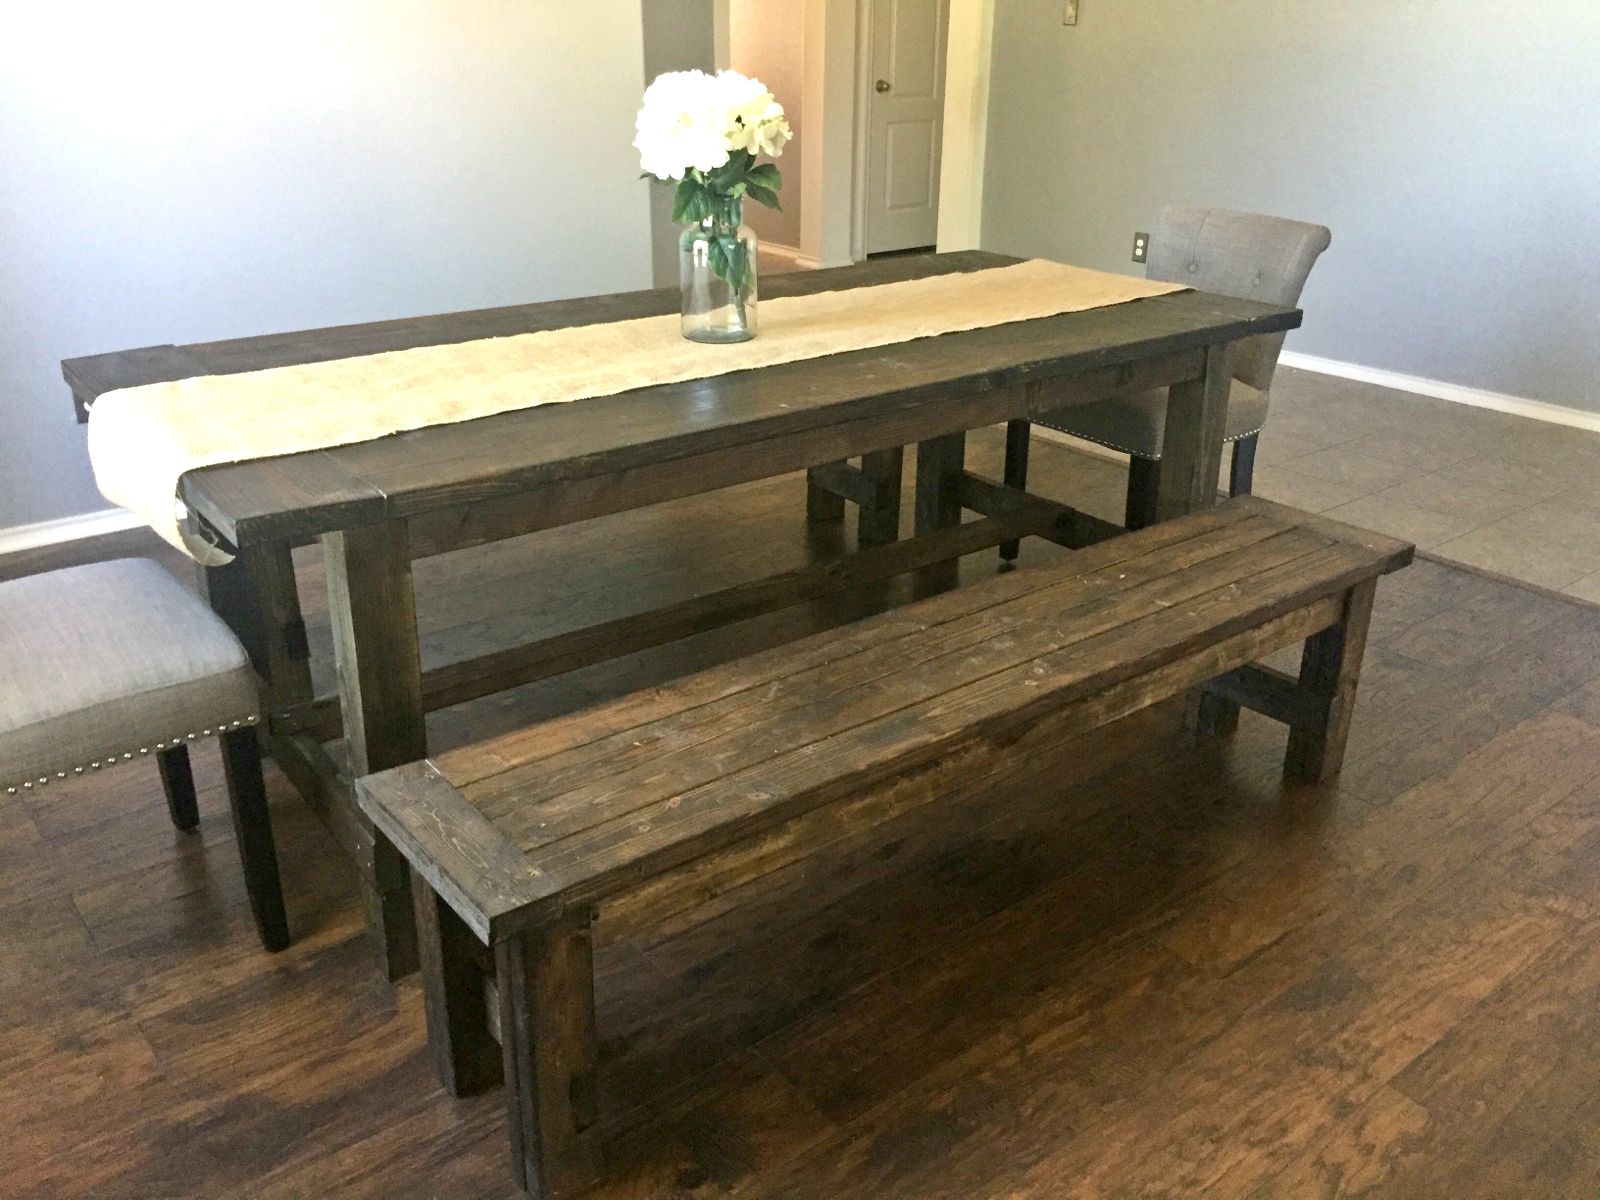 Farmhouse Dining Table With Bench -   Farmhouse table with bench Ideas